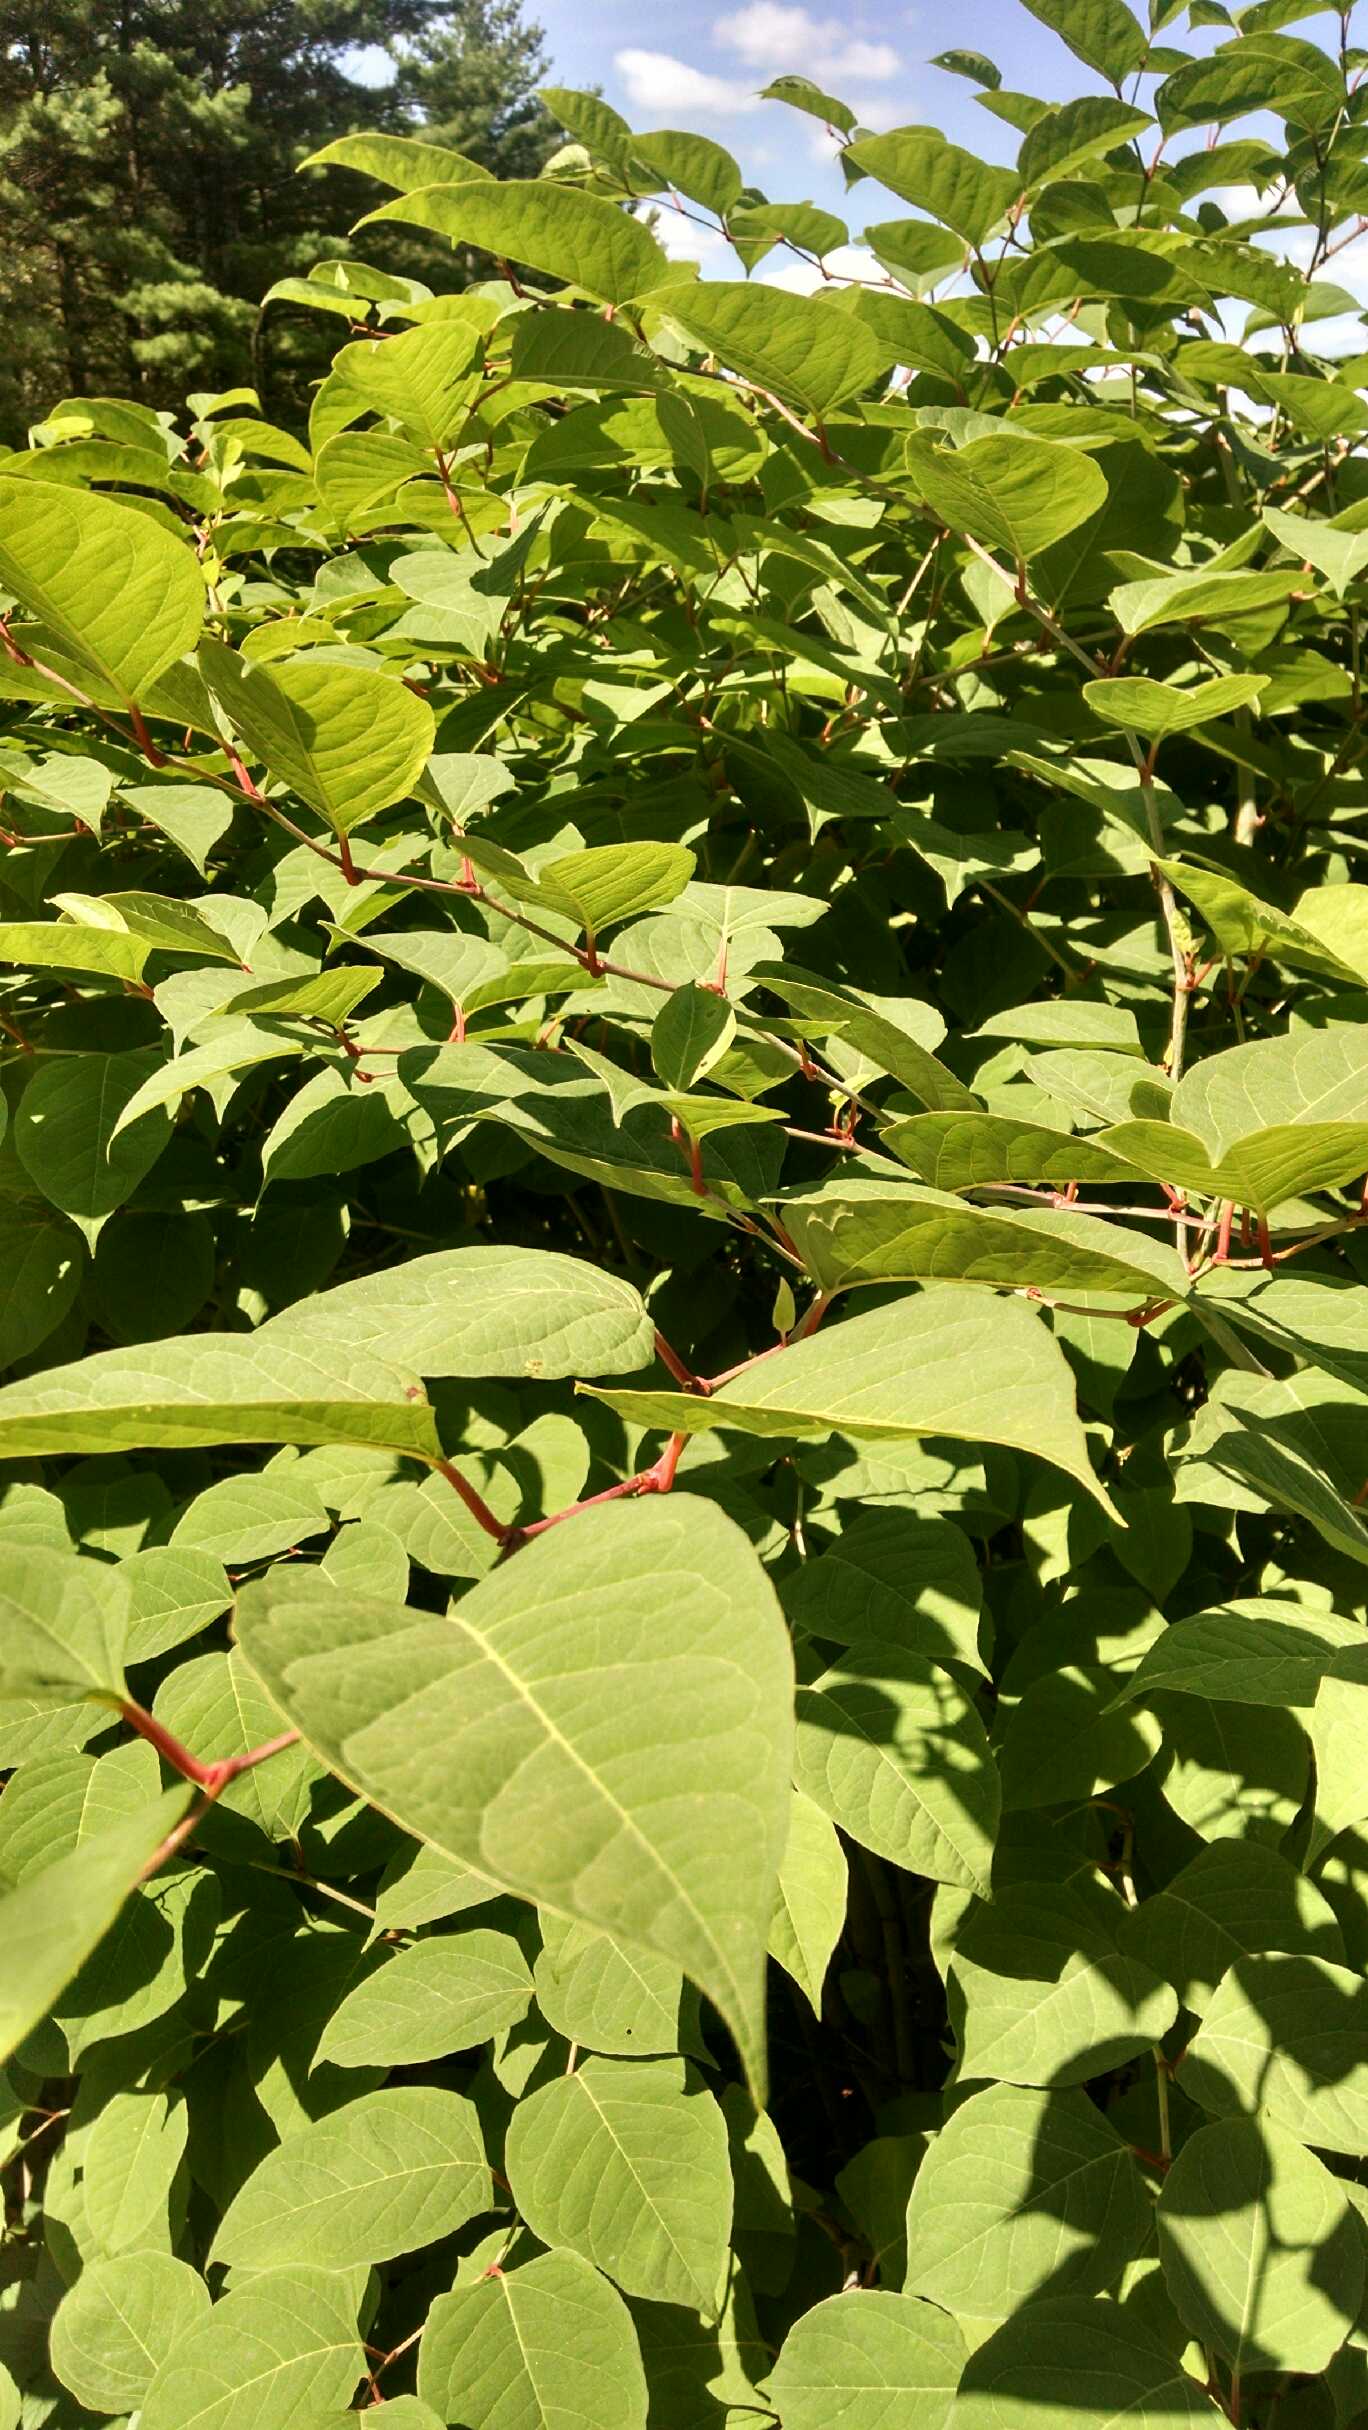 Knotweed can quickly become an invasive pest in natural areas as well as landscapes and can be found in the city as well as suburban landscapes.  